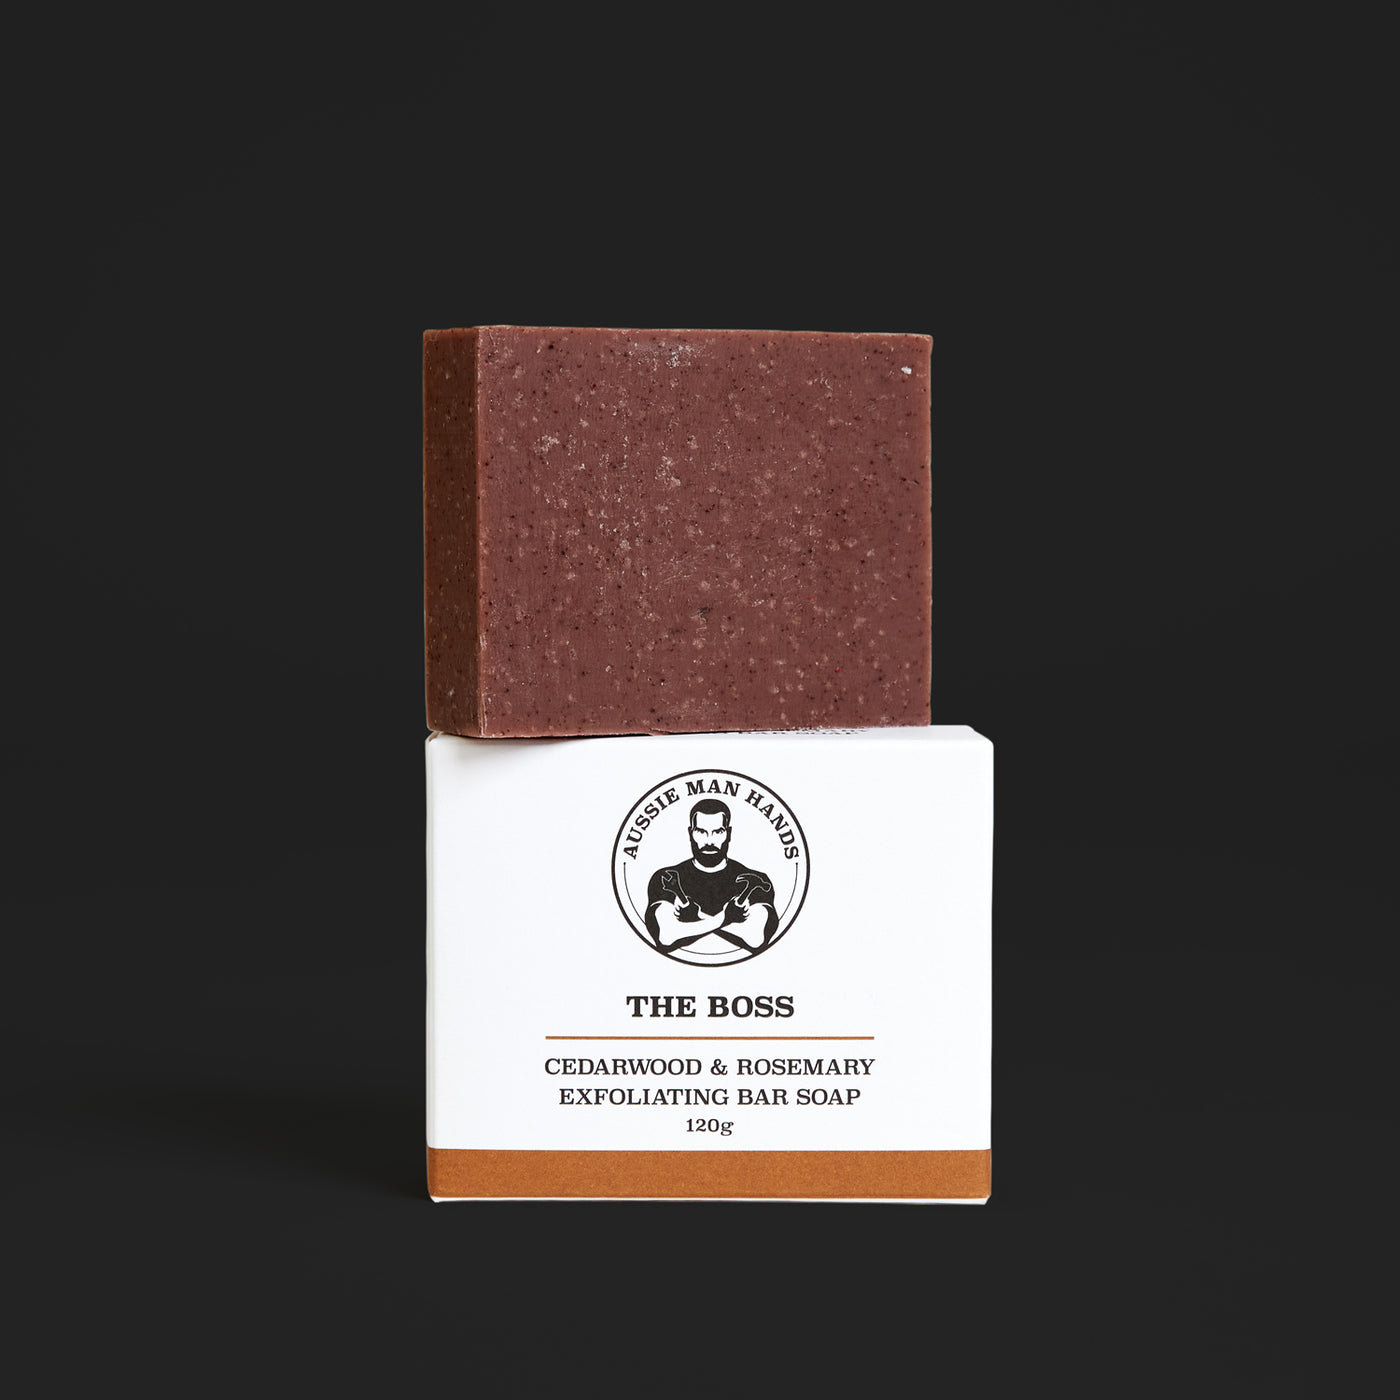 The Boss exfoliating natural ingredient soap with crushed walnut shell